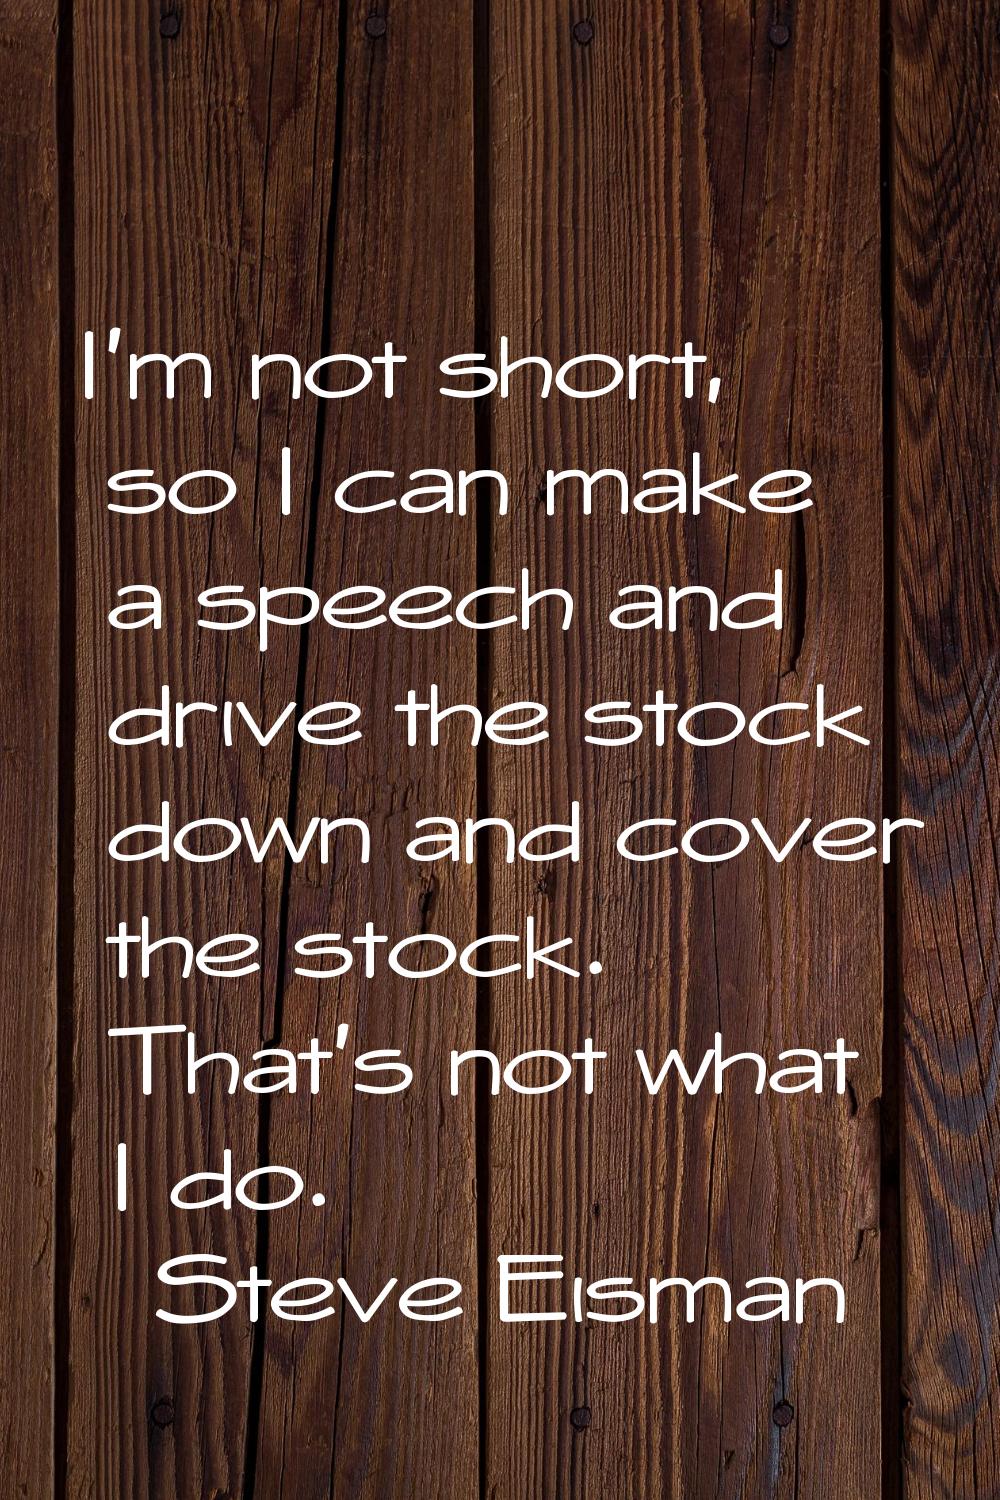 I'm not short, so I can make a speech and drive the stock down and cover the stock. That's not what